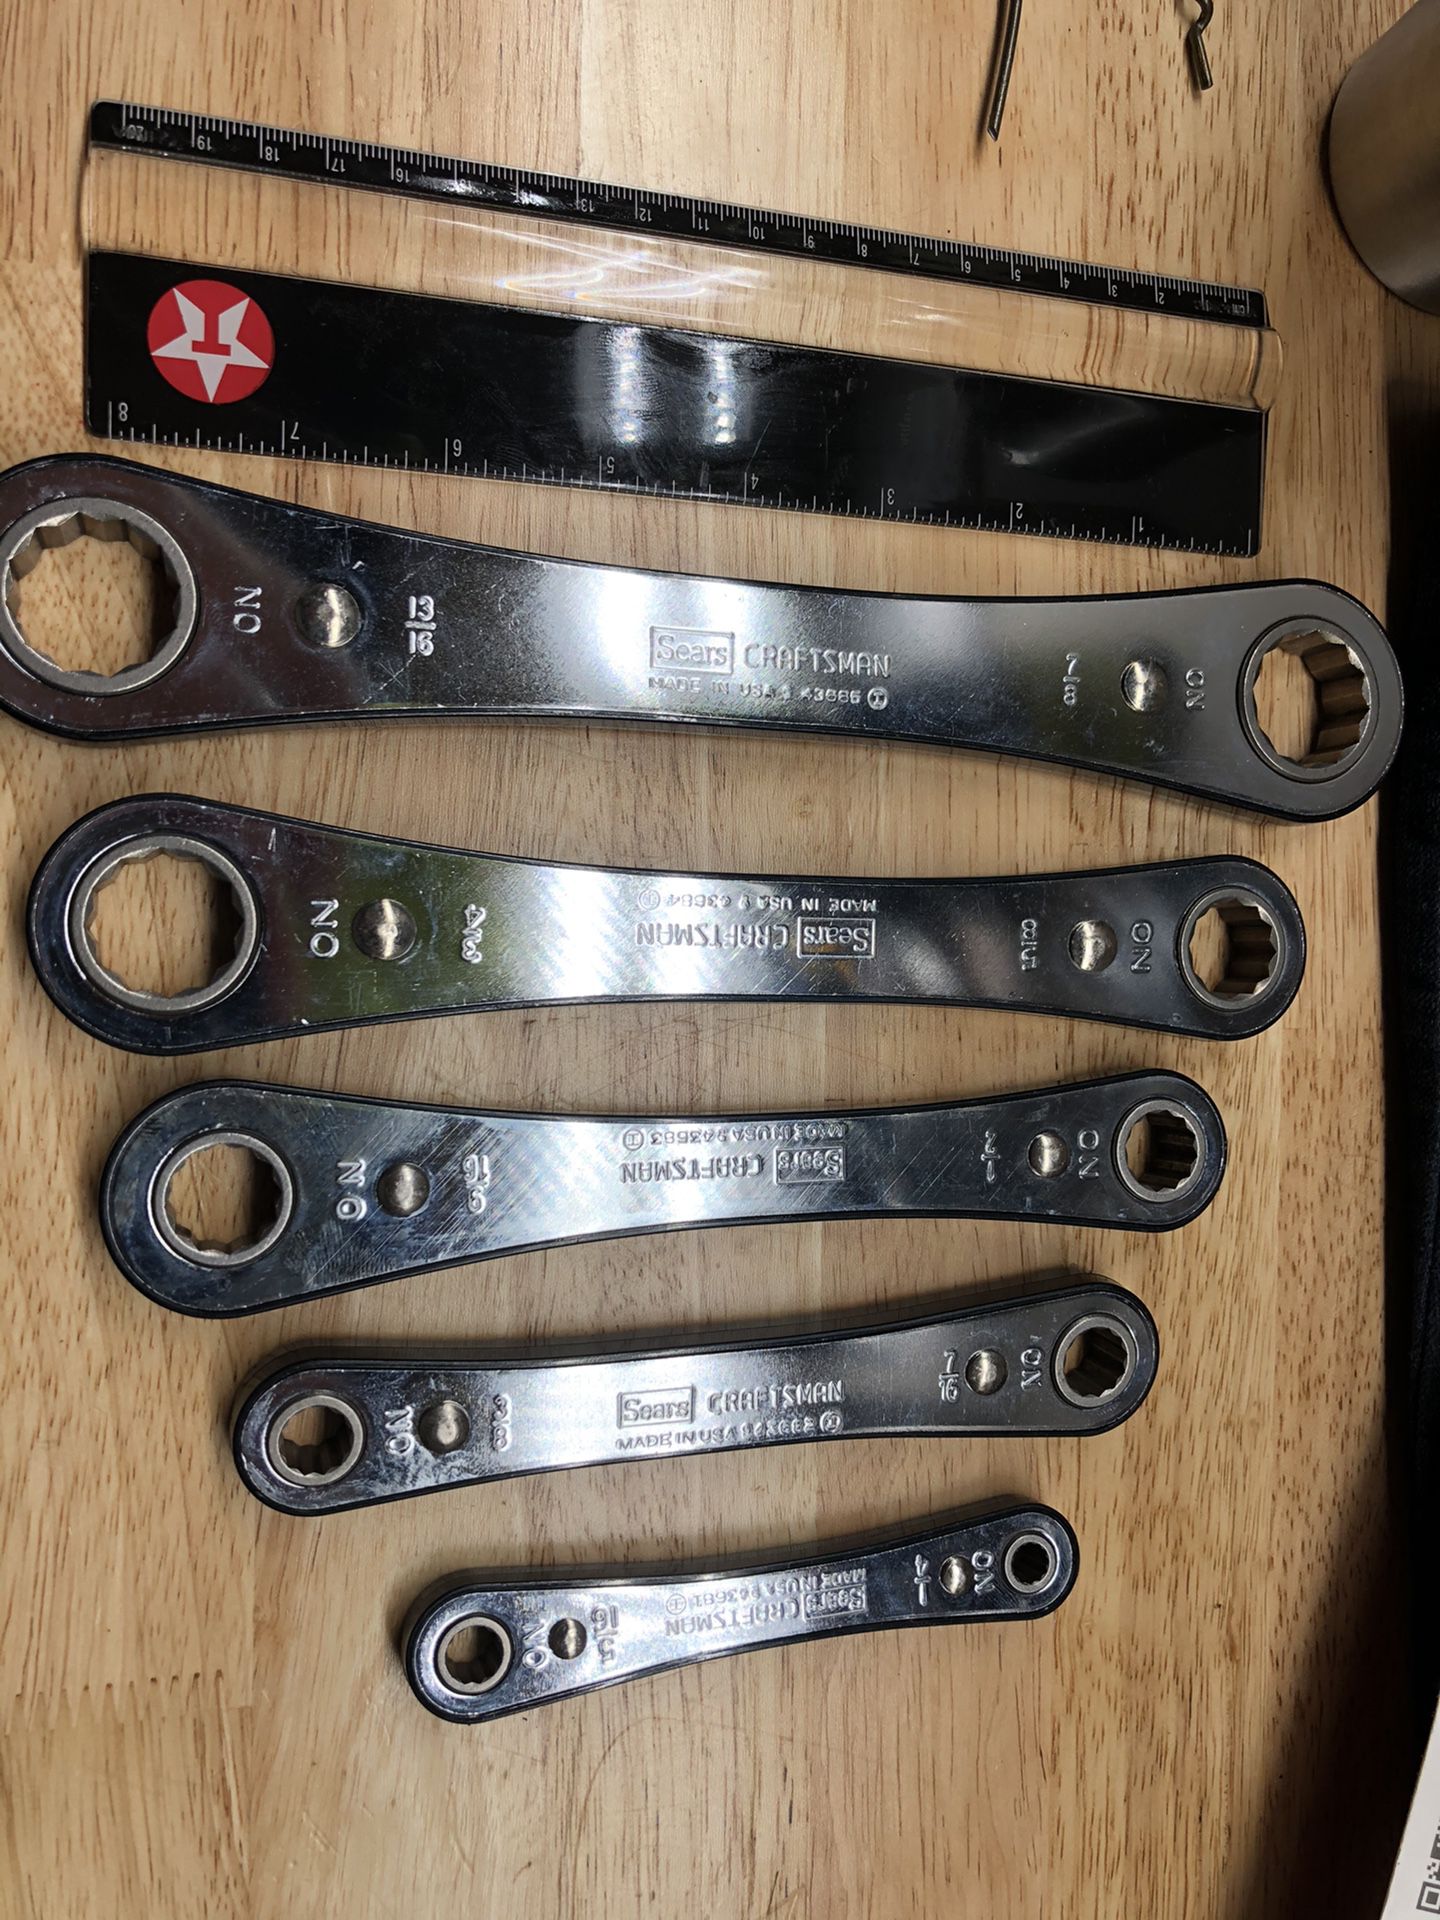 Craftsman Double box end Ratchet wrench set